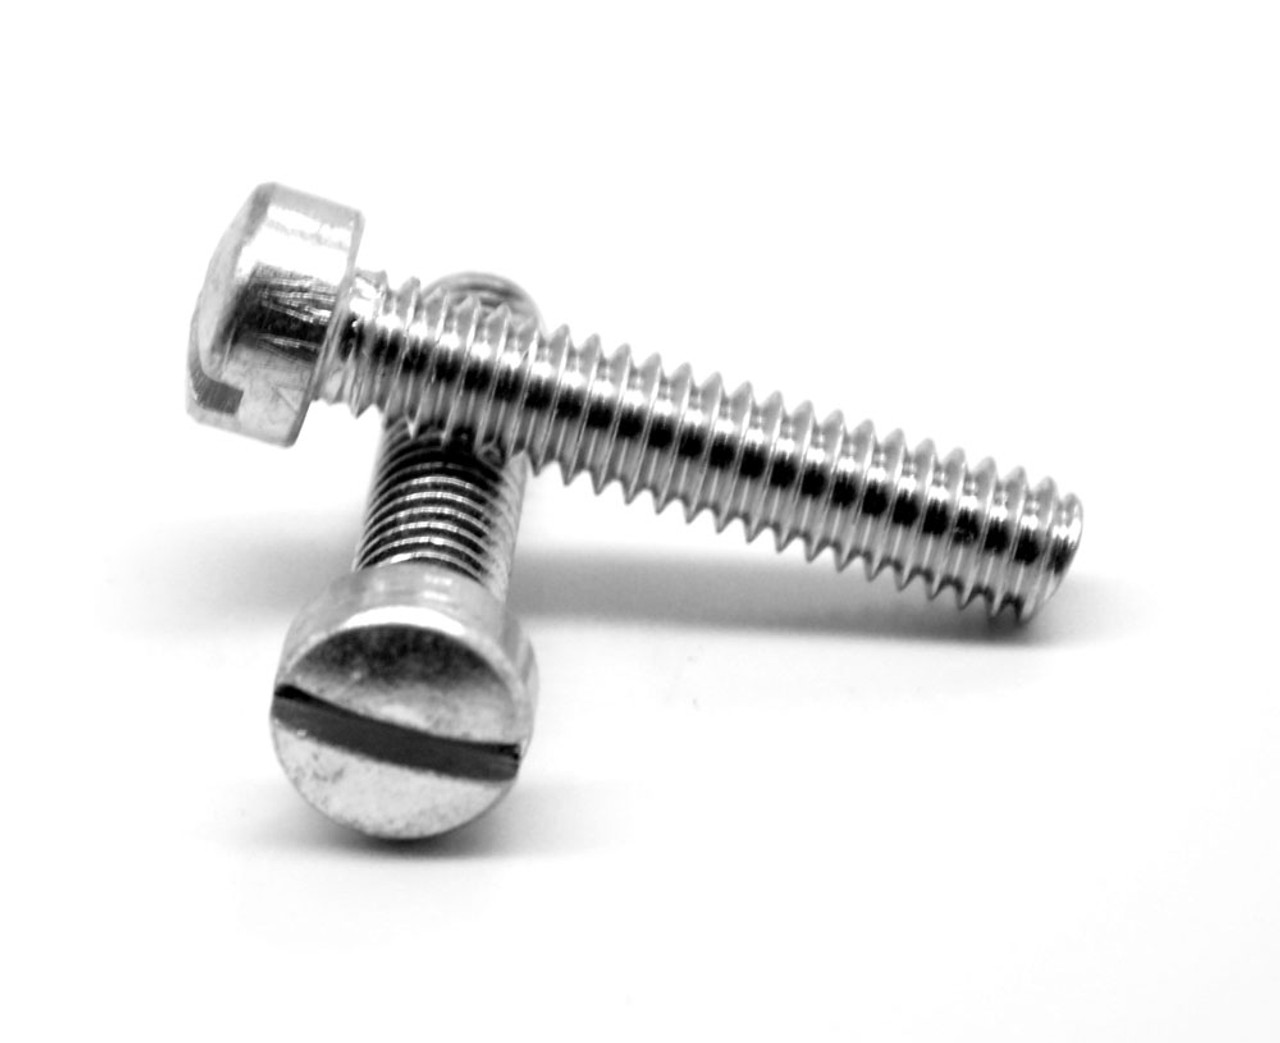 #0-80 x 9/32" (FT) Fine Thread Machine Screw Slotted Fillister Head Stainless Steel 18-8